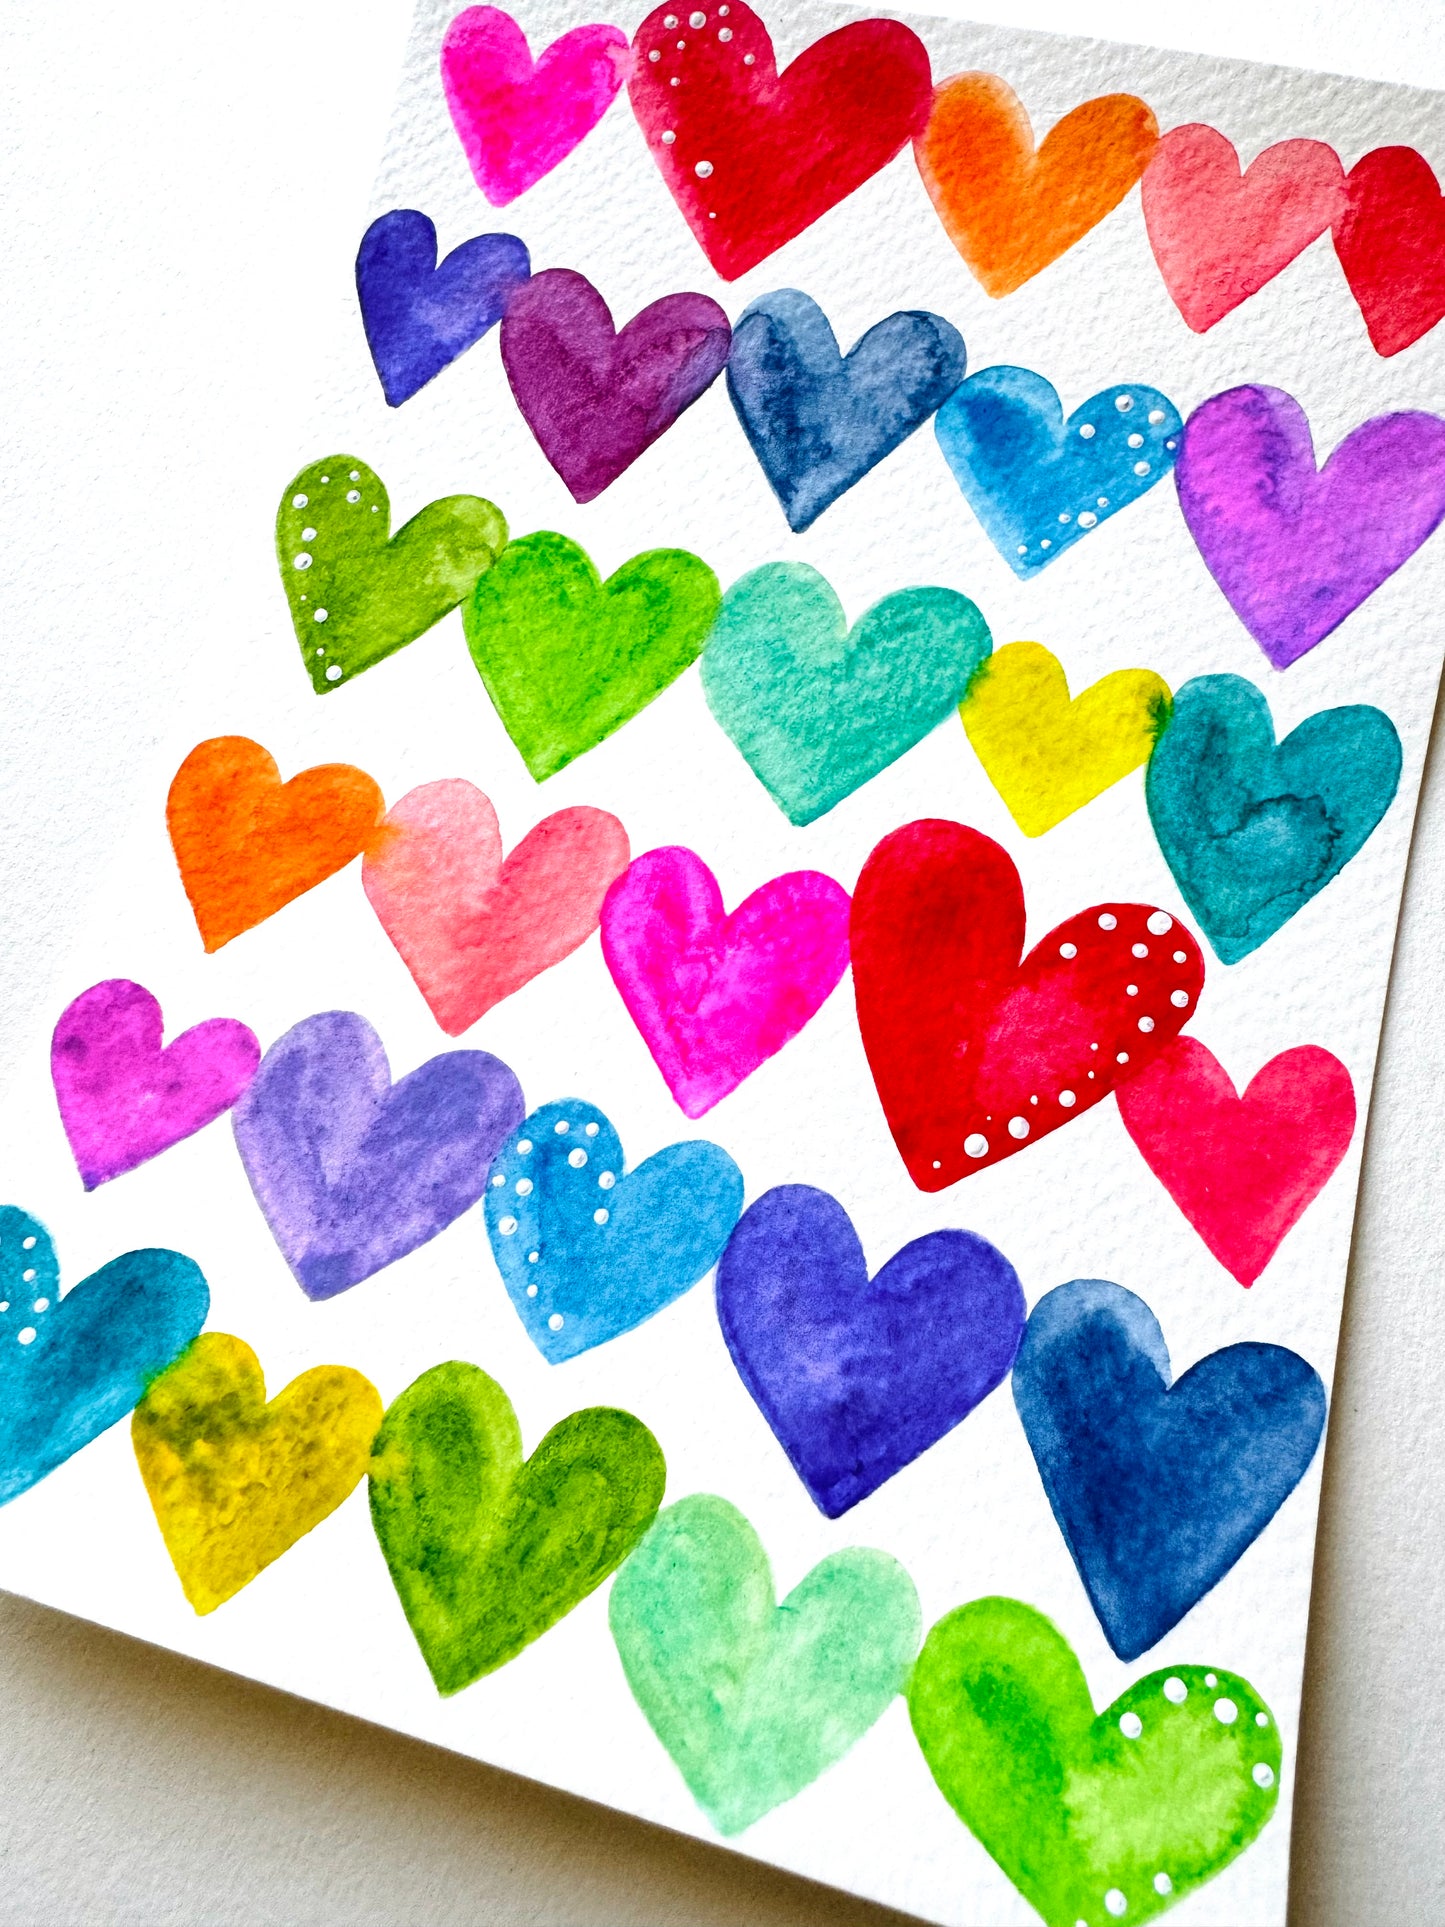 Rainbow Watercolor Hearts Original Painting on 5x7 inch paper no. 3